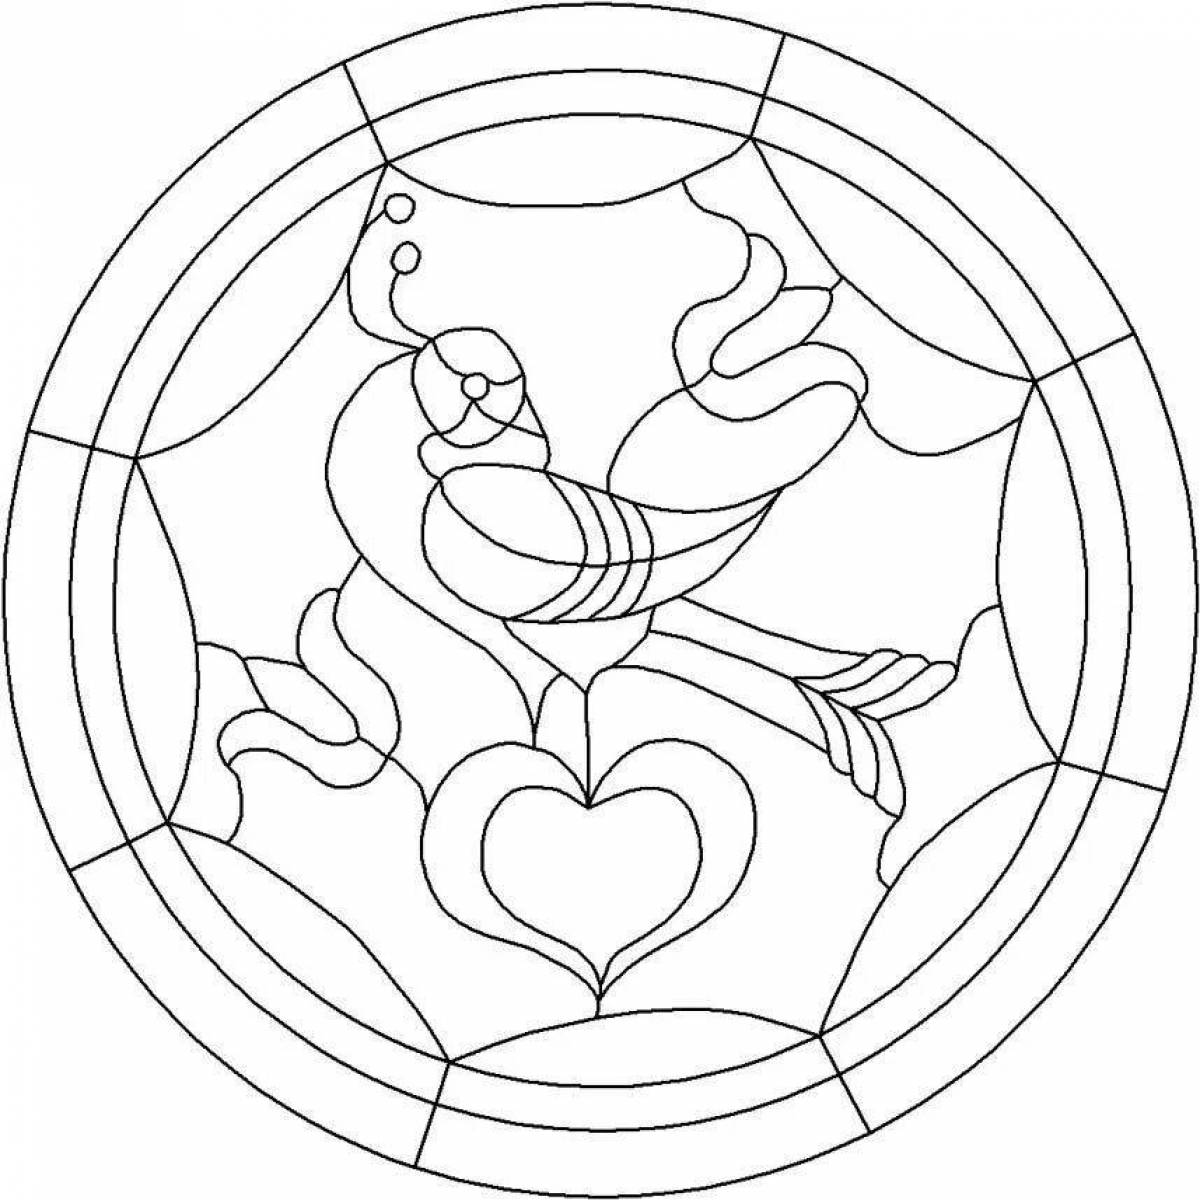 Royal stained glass coloring page